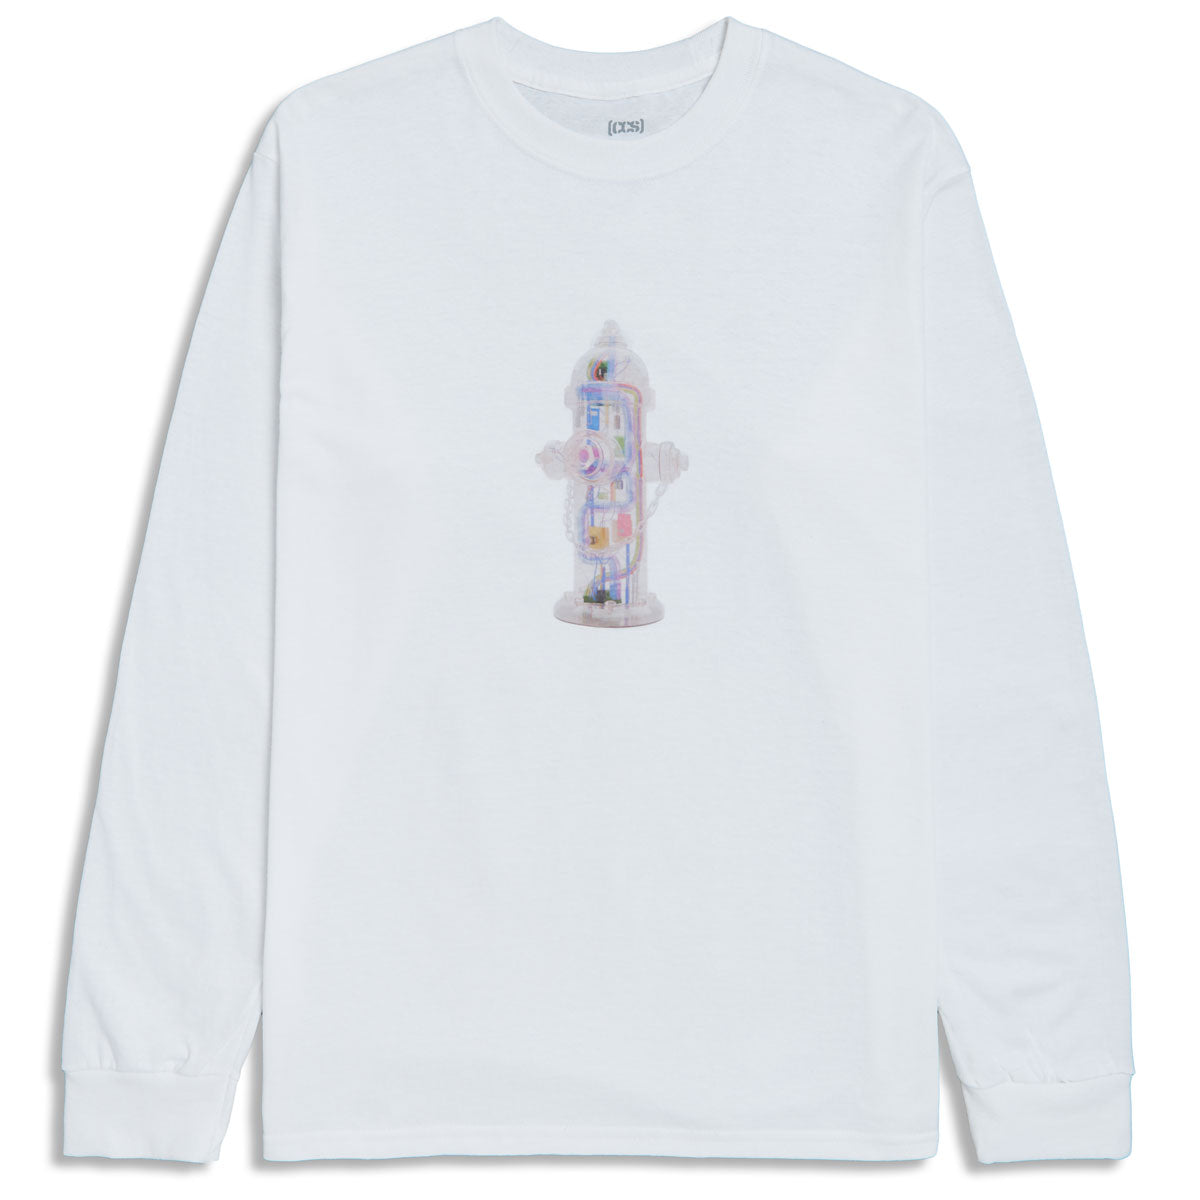 CCS Going Clear Hydrant Long Sleeve T-Shirt - White - XL image 1